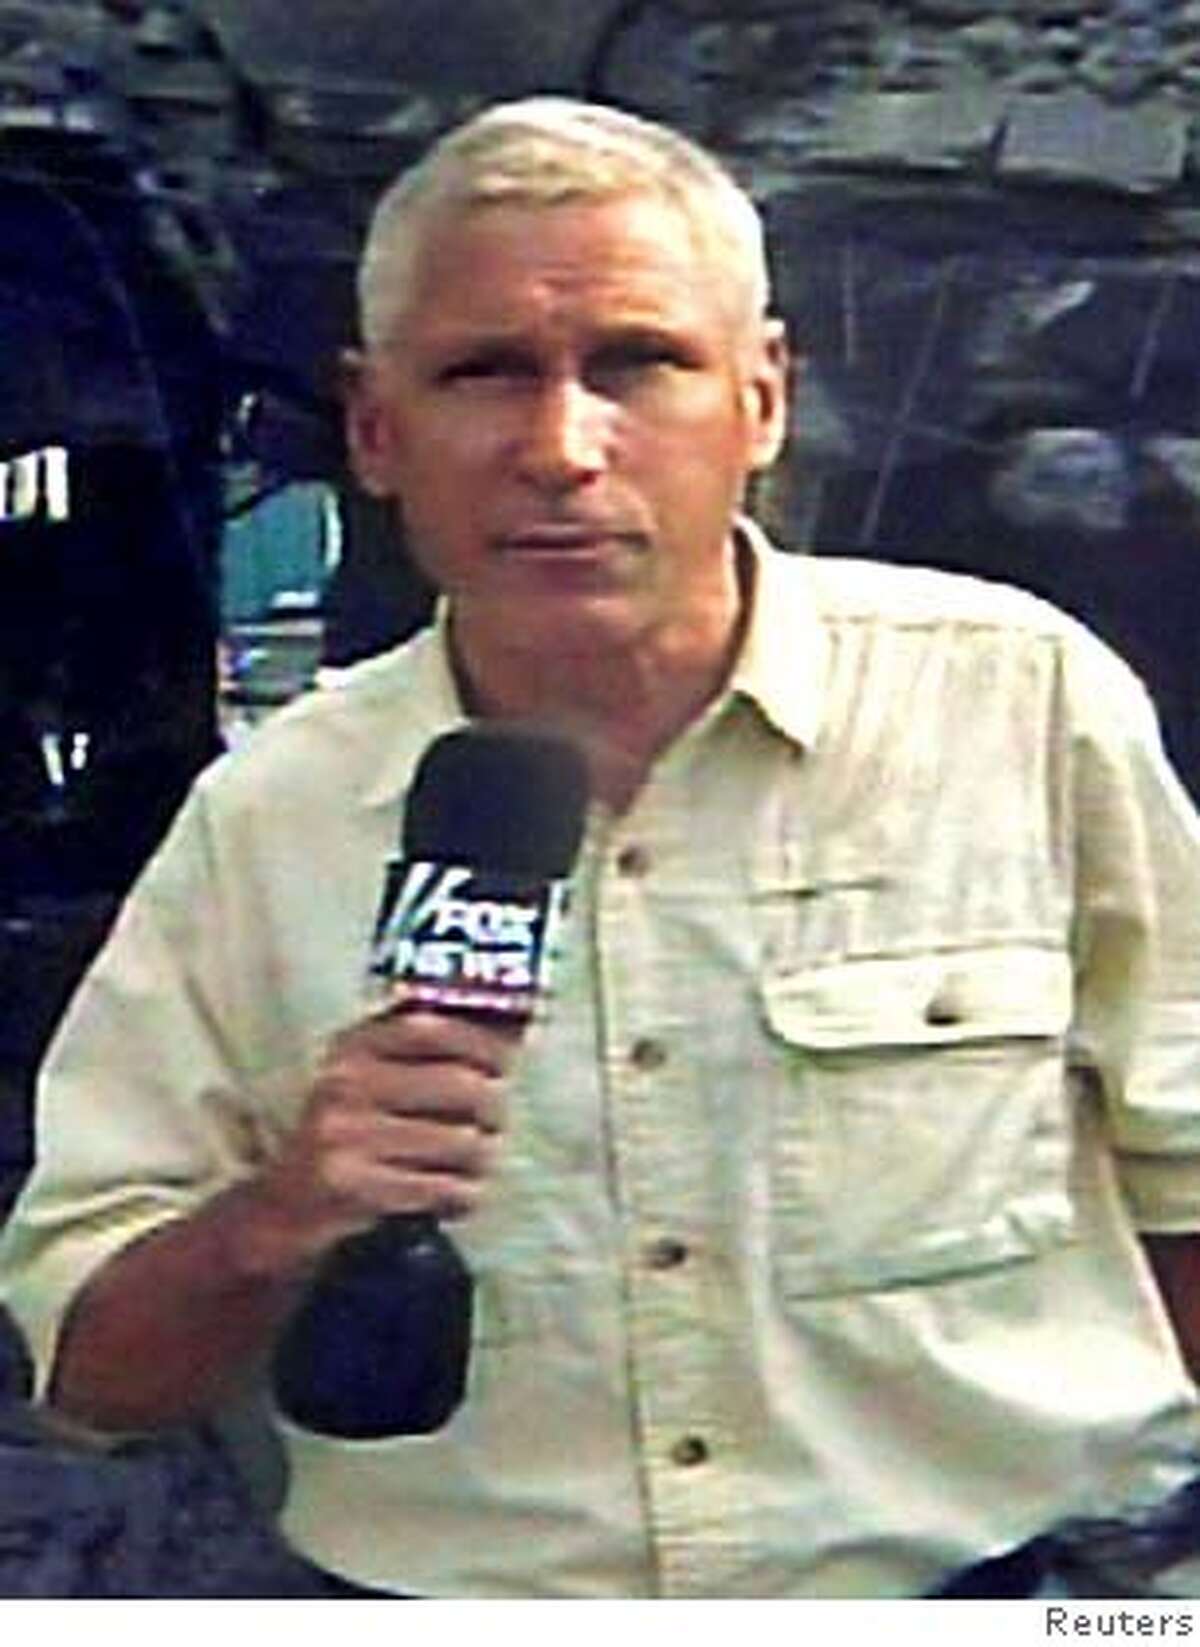 American Fox News Channel reporter Steve Centanni of the U.S., who was kidnapped by Palestinian gunmen on Monday in Gaza, is seen in this handout photo released August 16, 2006. Palestinian gunmen kidnapped two foreign journalists working for the Fox News Channel in Gaza on Monday, a witness and the U.S. television network said. NO ARCHIVES REUTERS/Handout (GAZA) 0